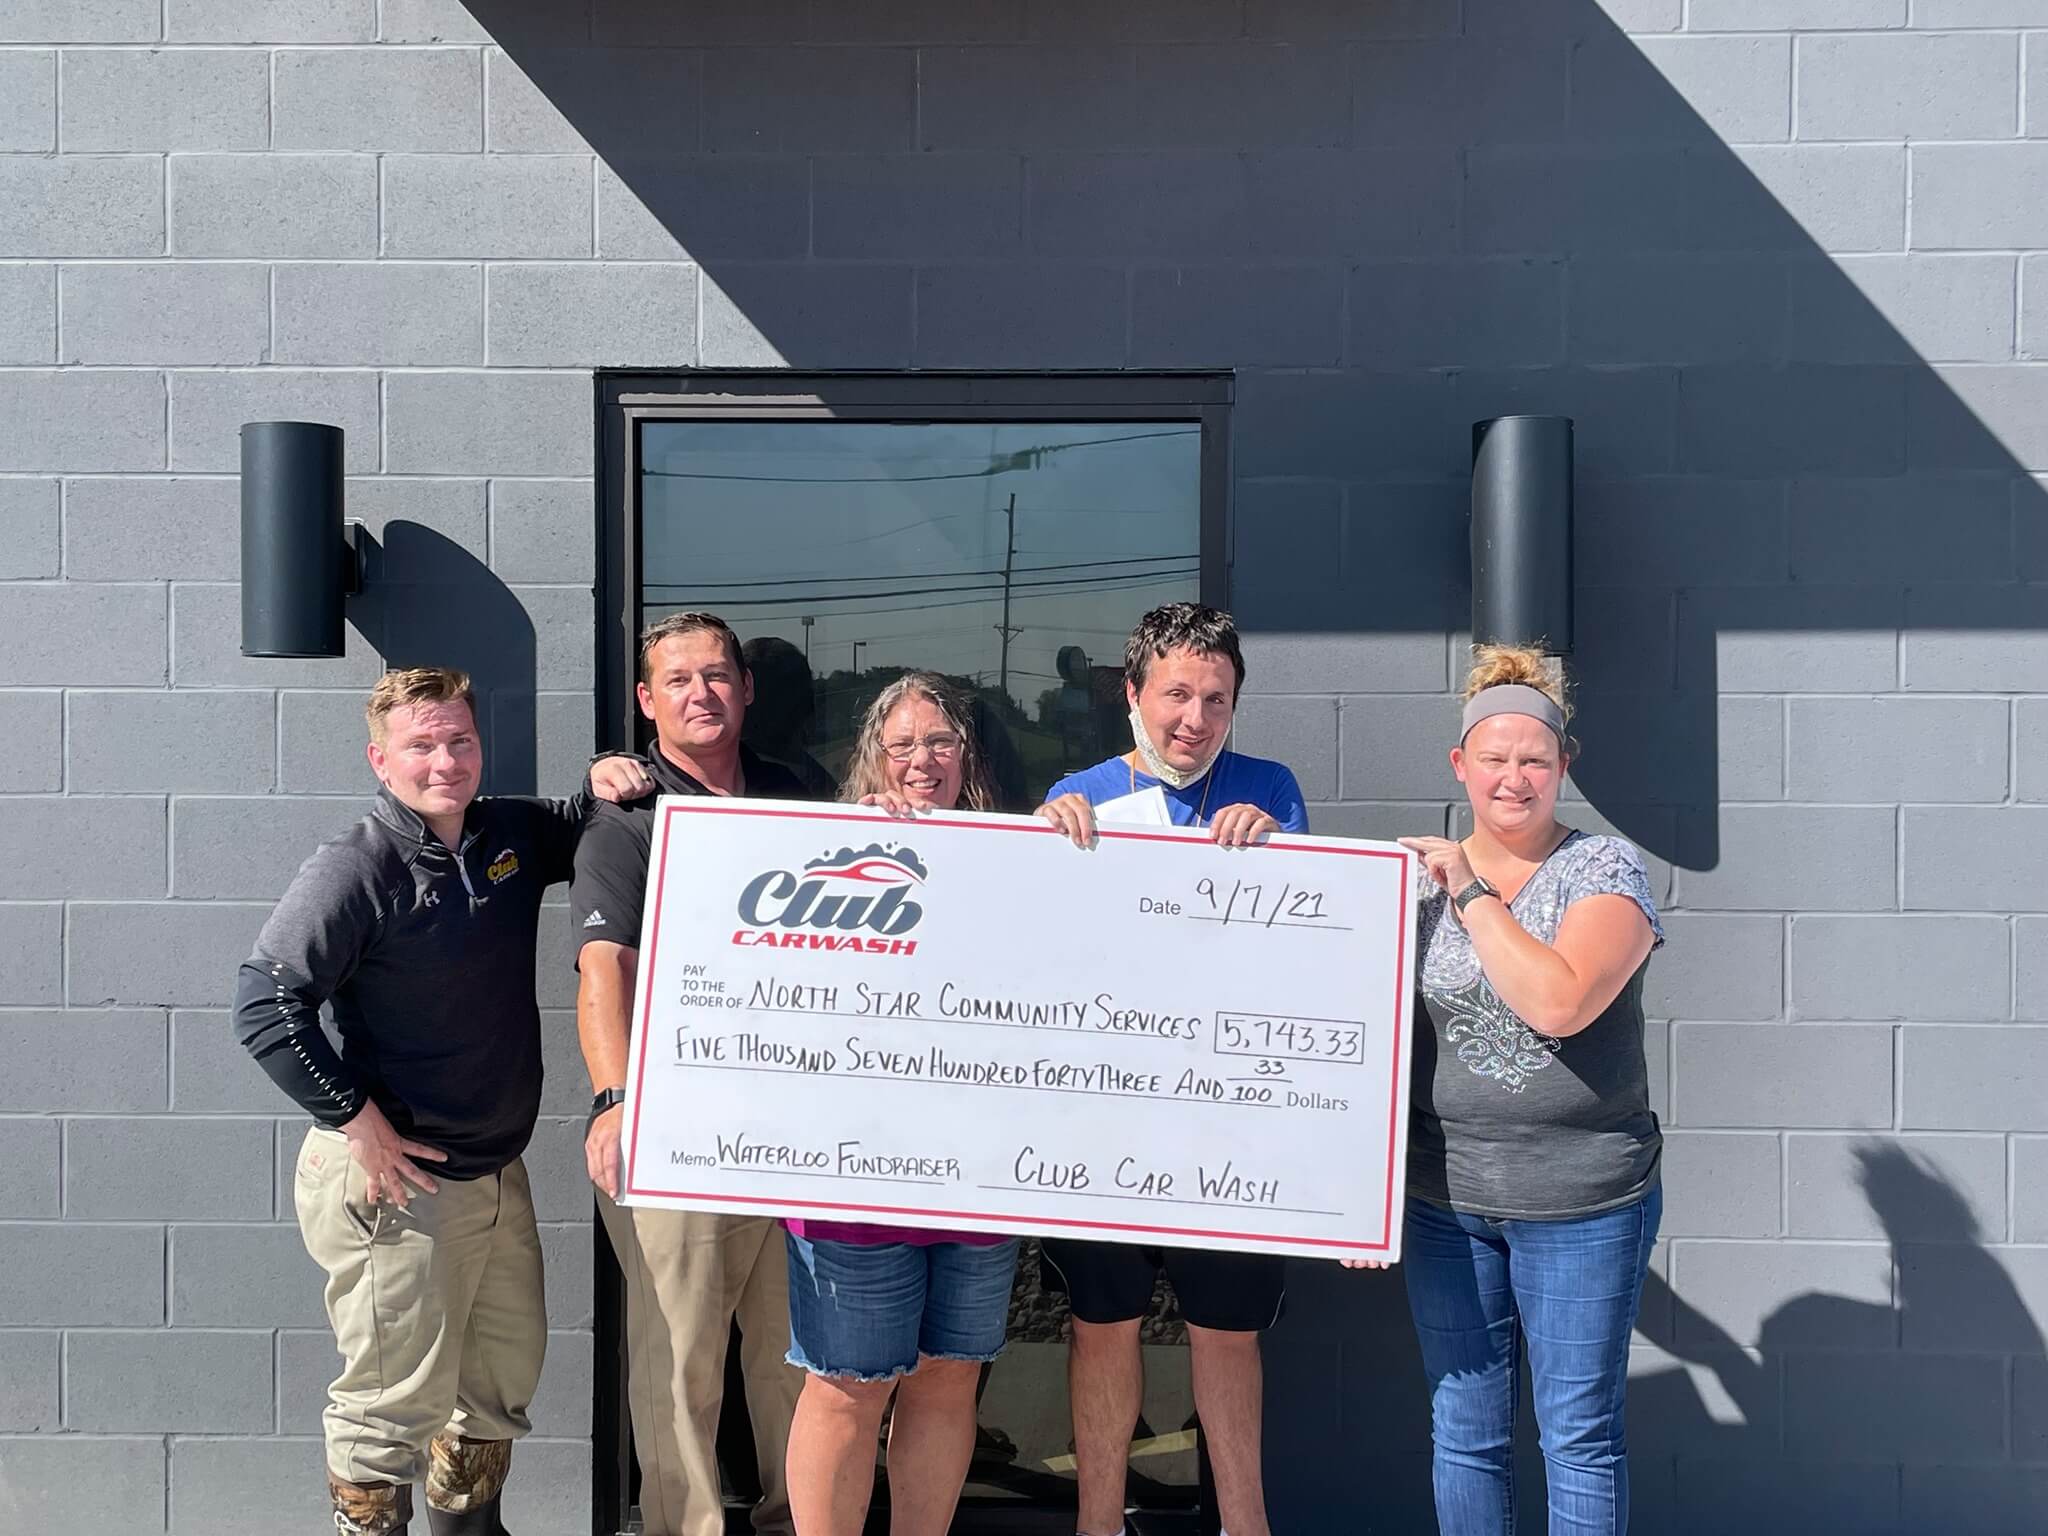 Club Car Wash employees and North Star Community Service representatives holding large check in front of the doors of the location.